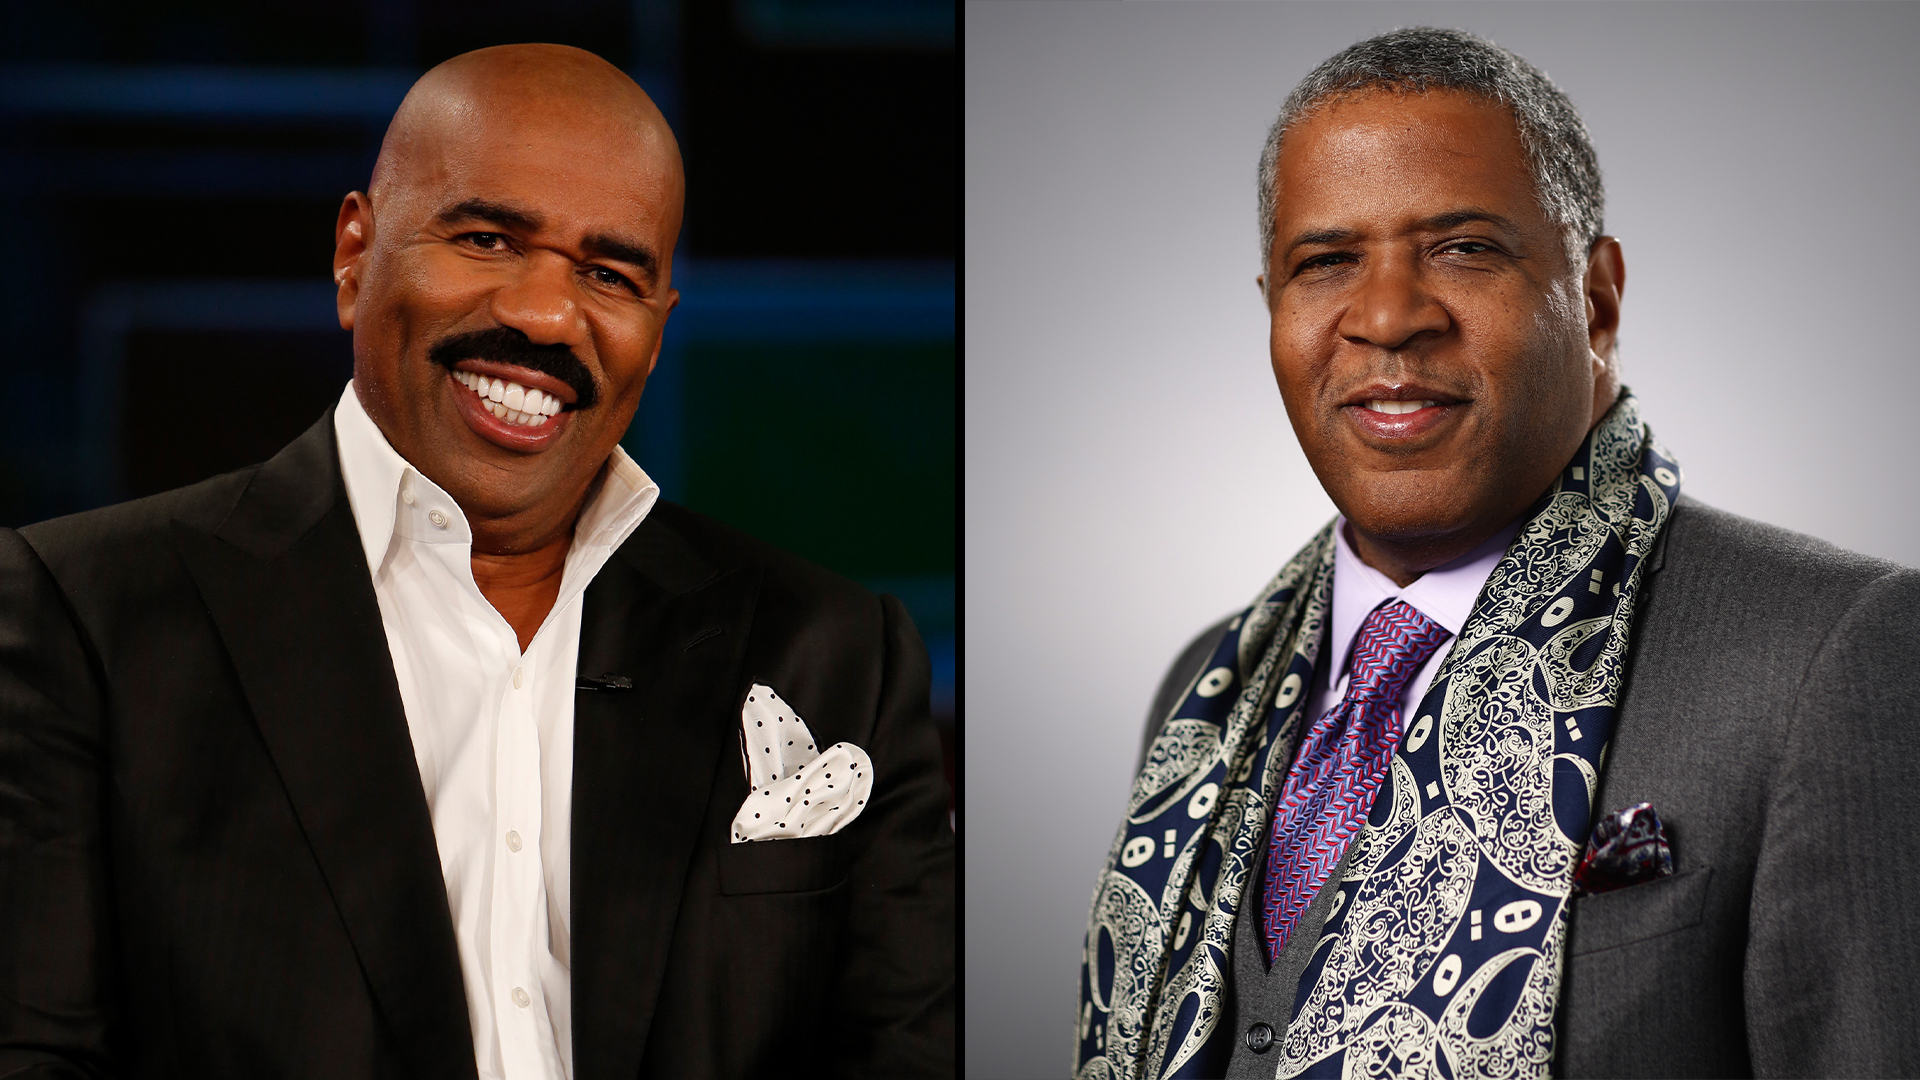 Billionaire Robert Smith Partners With Steve Harvey To Promote Success Among HBCU Students